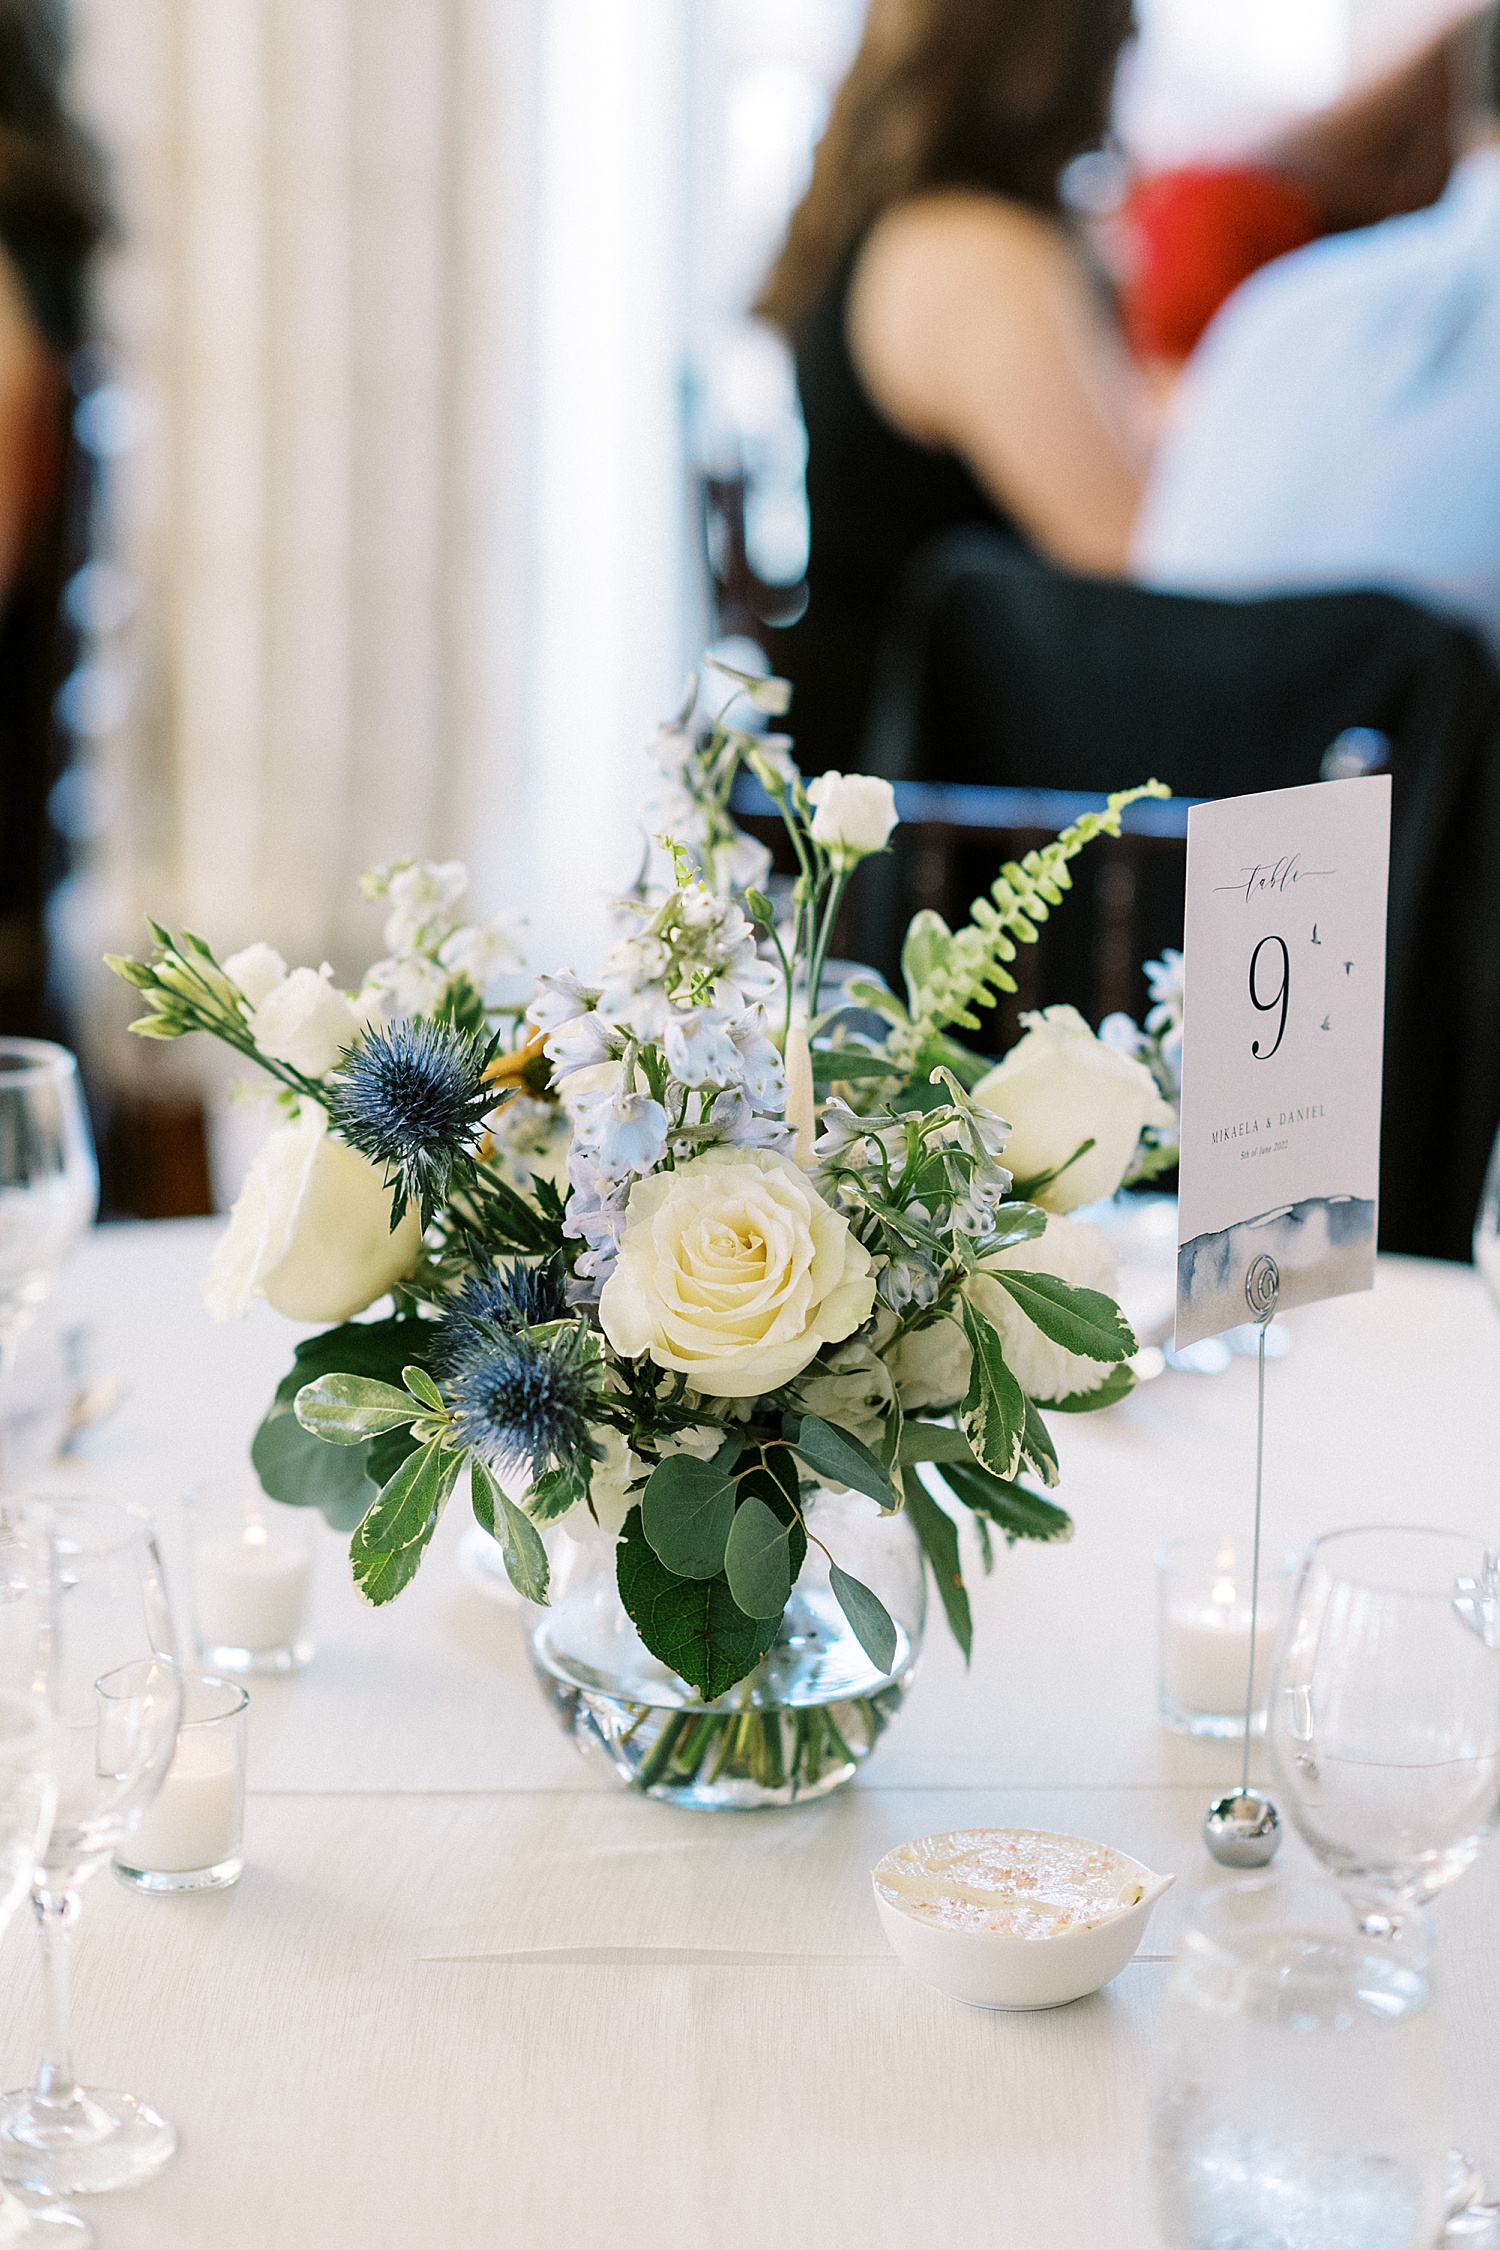 Flowers on reception table by Massachusetts wedding photographer